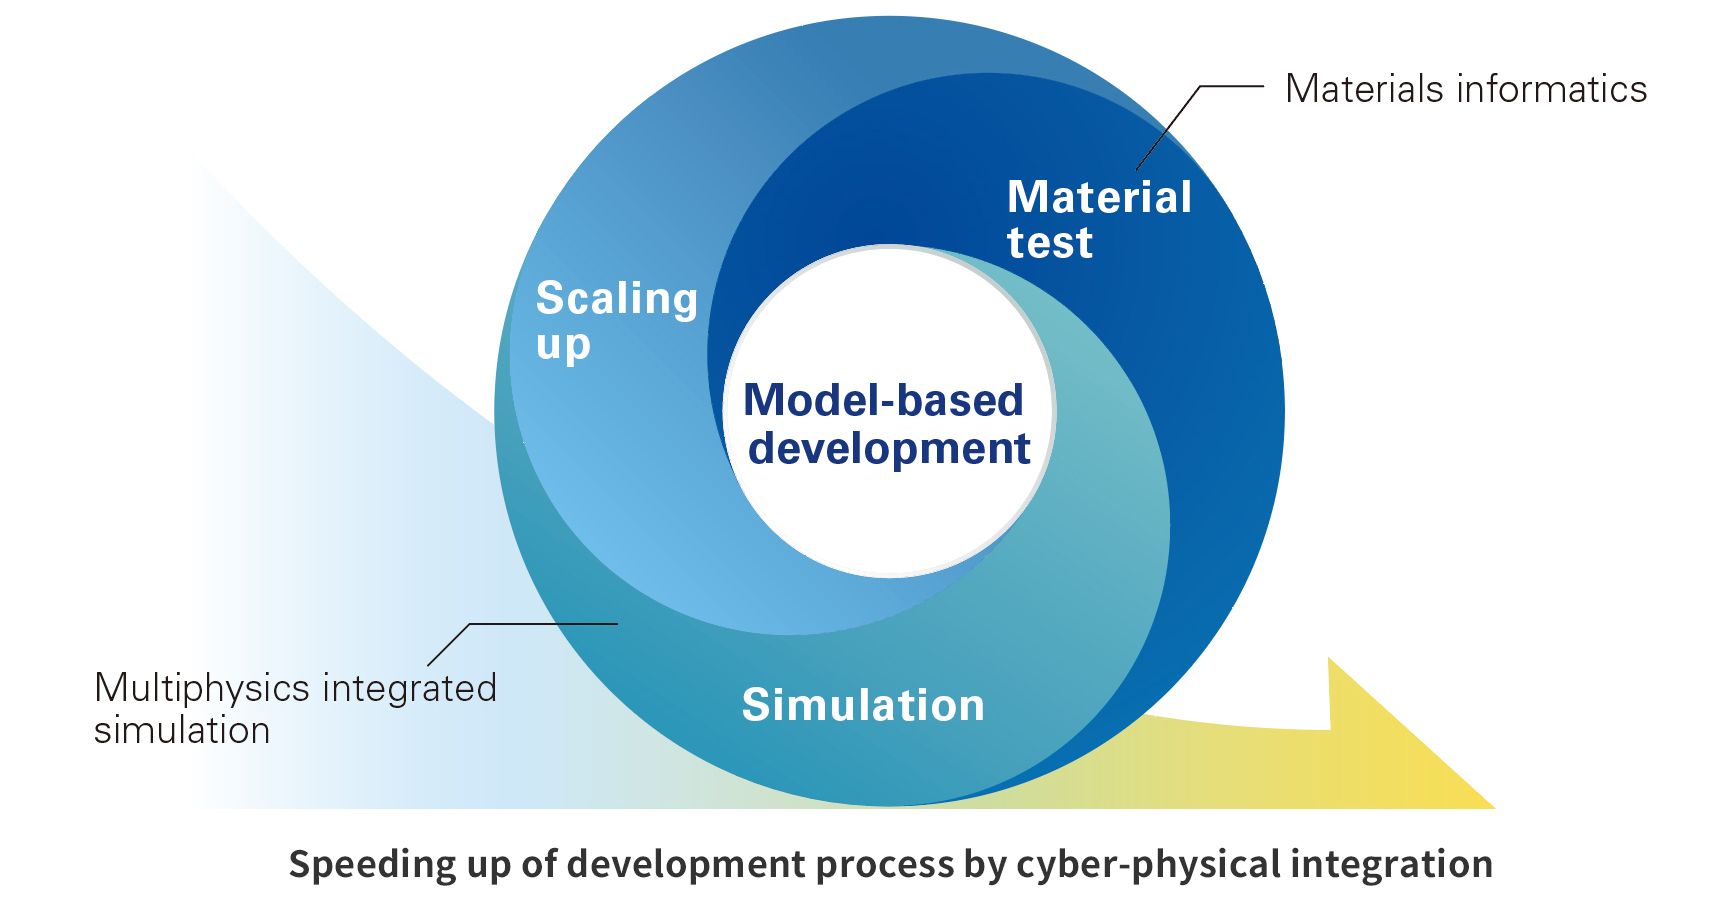 Speeding up of development process by cyber-physical integration